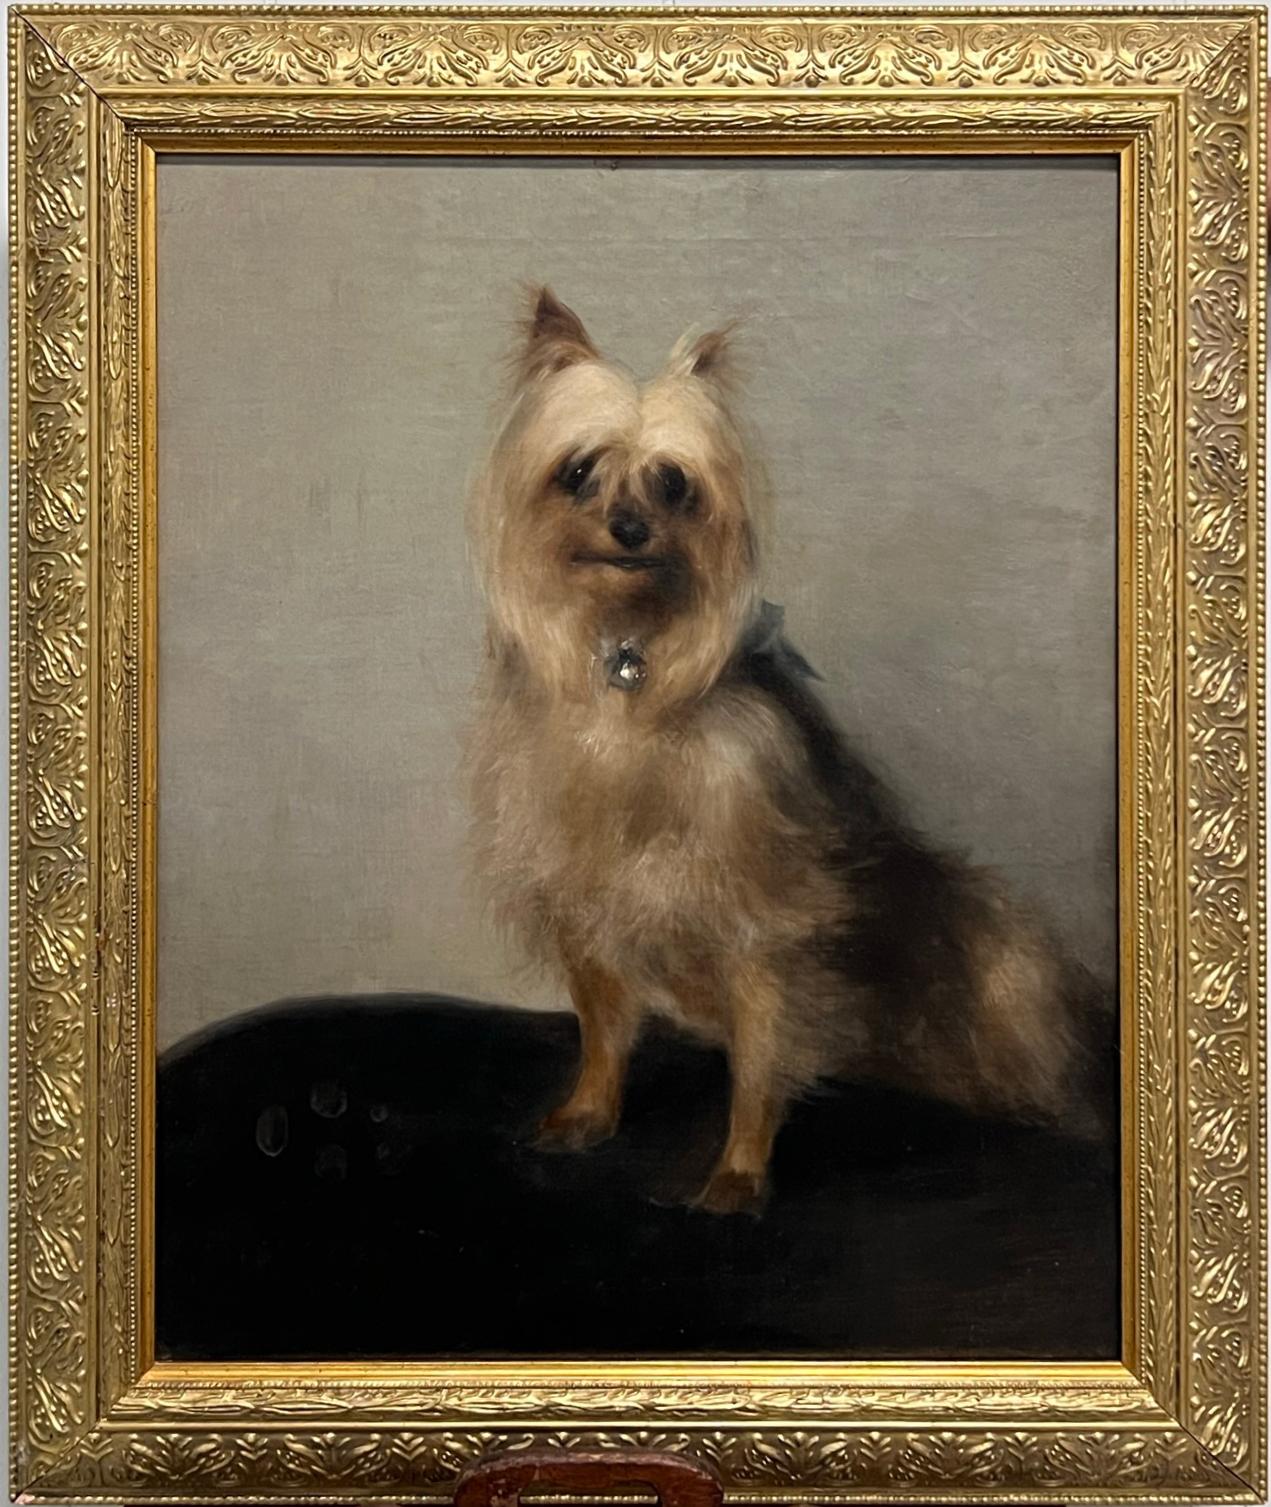 Sister Phoebe Portrait Painting - Antique 19th Century Yorkie Terrier Dog Portrait in Carved Gilt Frame